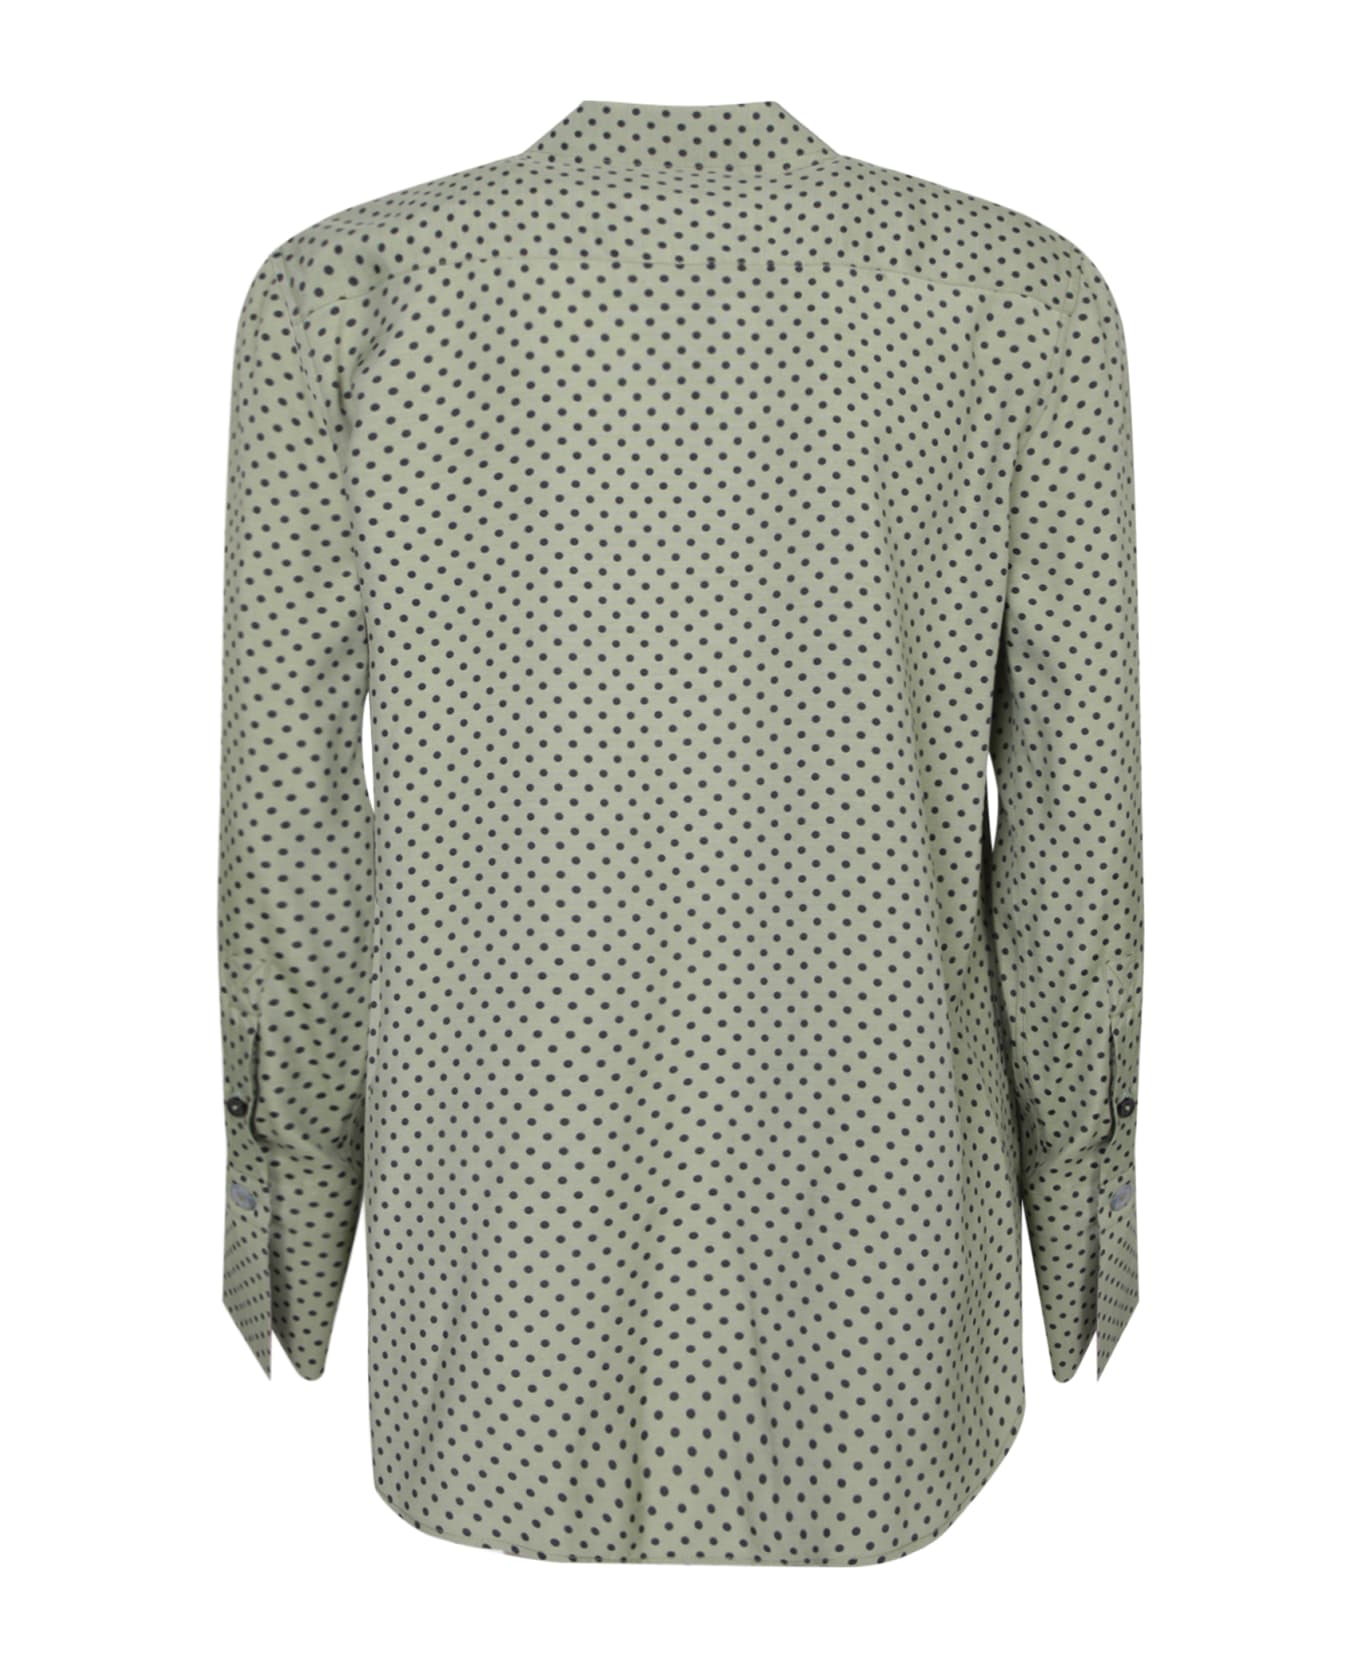 Paul Smith Patterned Green Shirt - Green シャツ